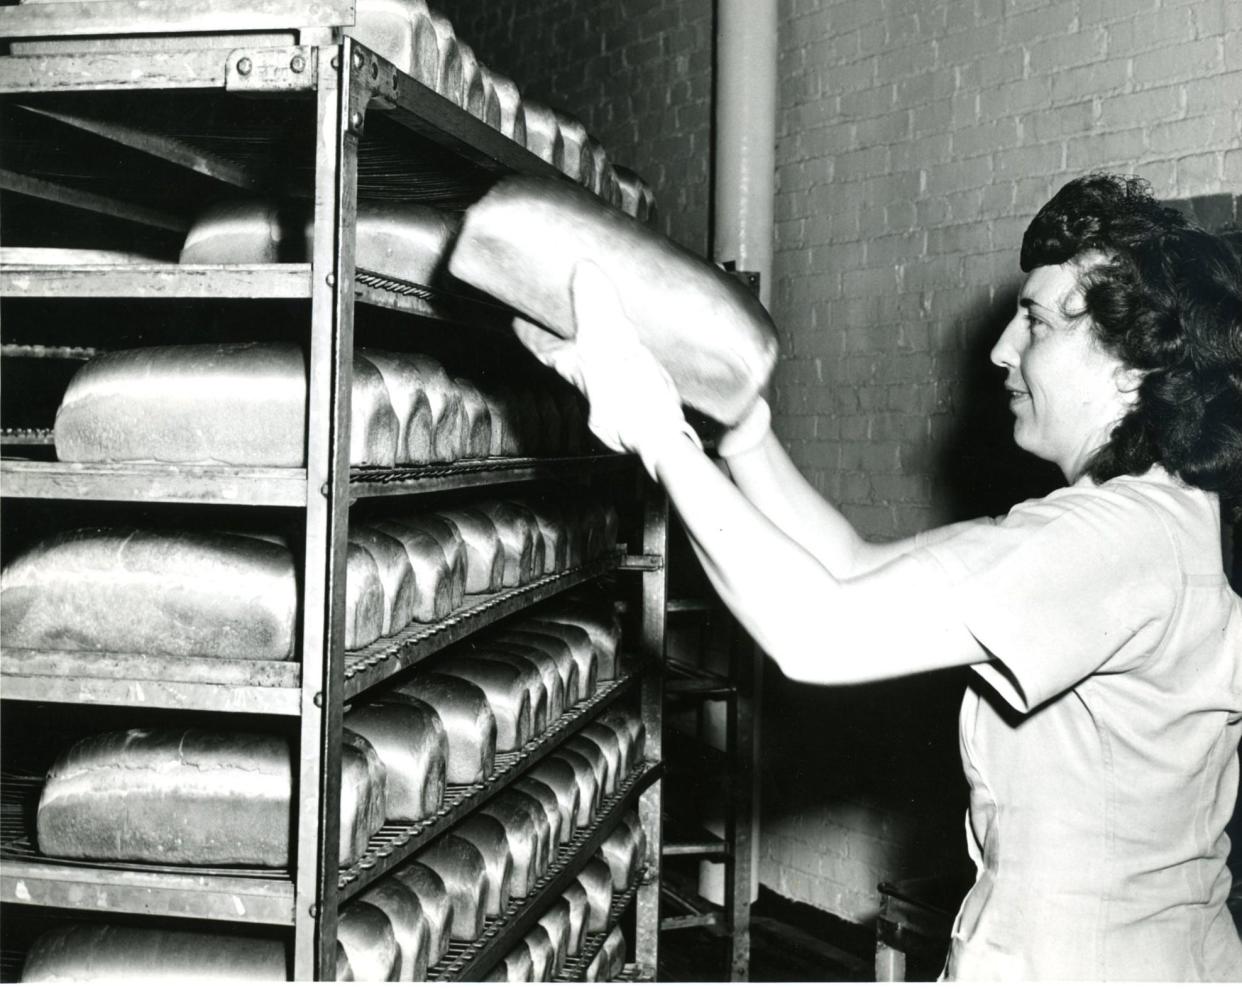 Bernice McClelland loads a cart with freshly baked loaves in 1946 at the Wonder Bread bakery at 178 S. Forge St. in Akron